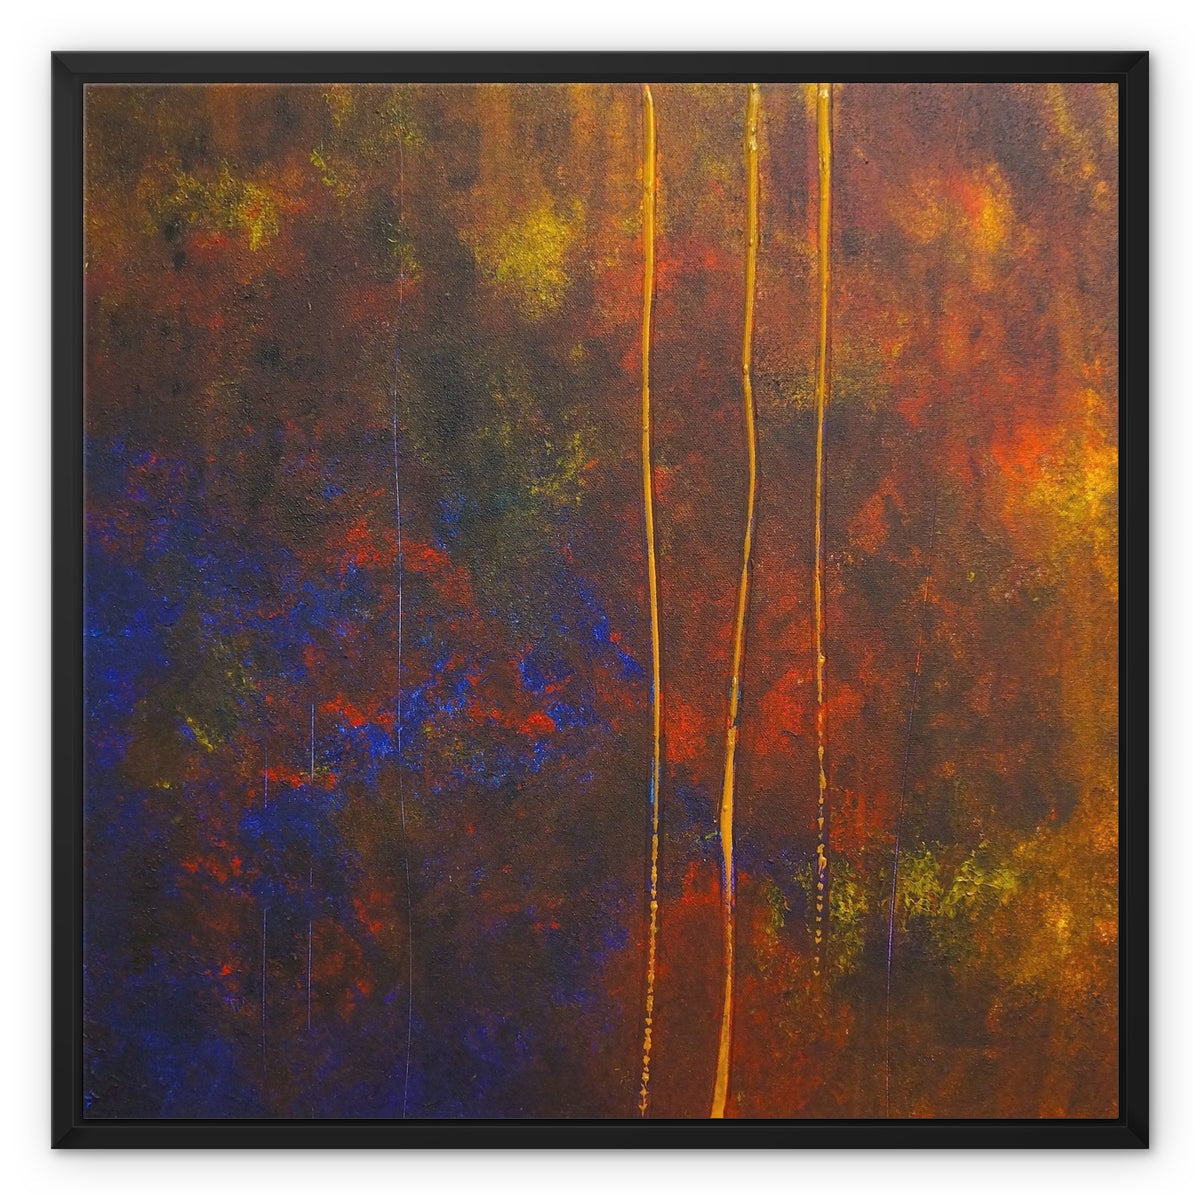 The Autumn Wood Abstract Painting | Framed Canvas From Scotland-Floating Framed Canvas Prints-Abstract & Impressionistic Art Gallery-24"x24"-Paintings, Prints, Homeware, Art Gifts From Scotland By Scottish Artist Kevin Hunter